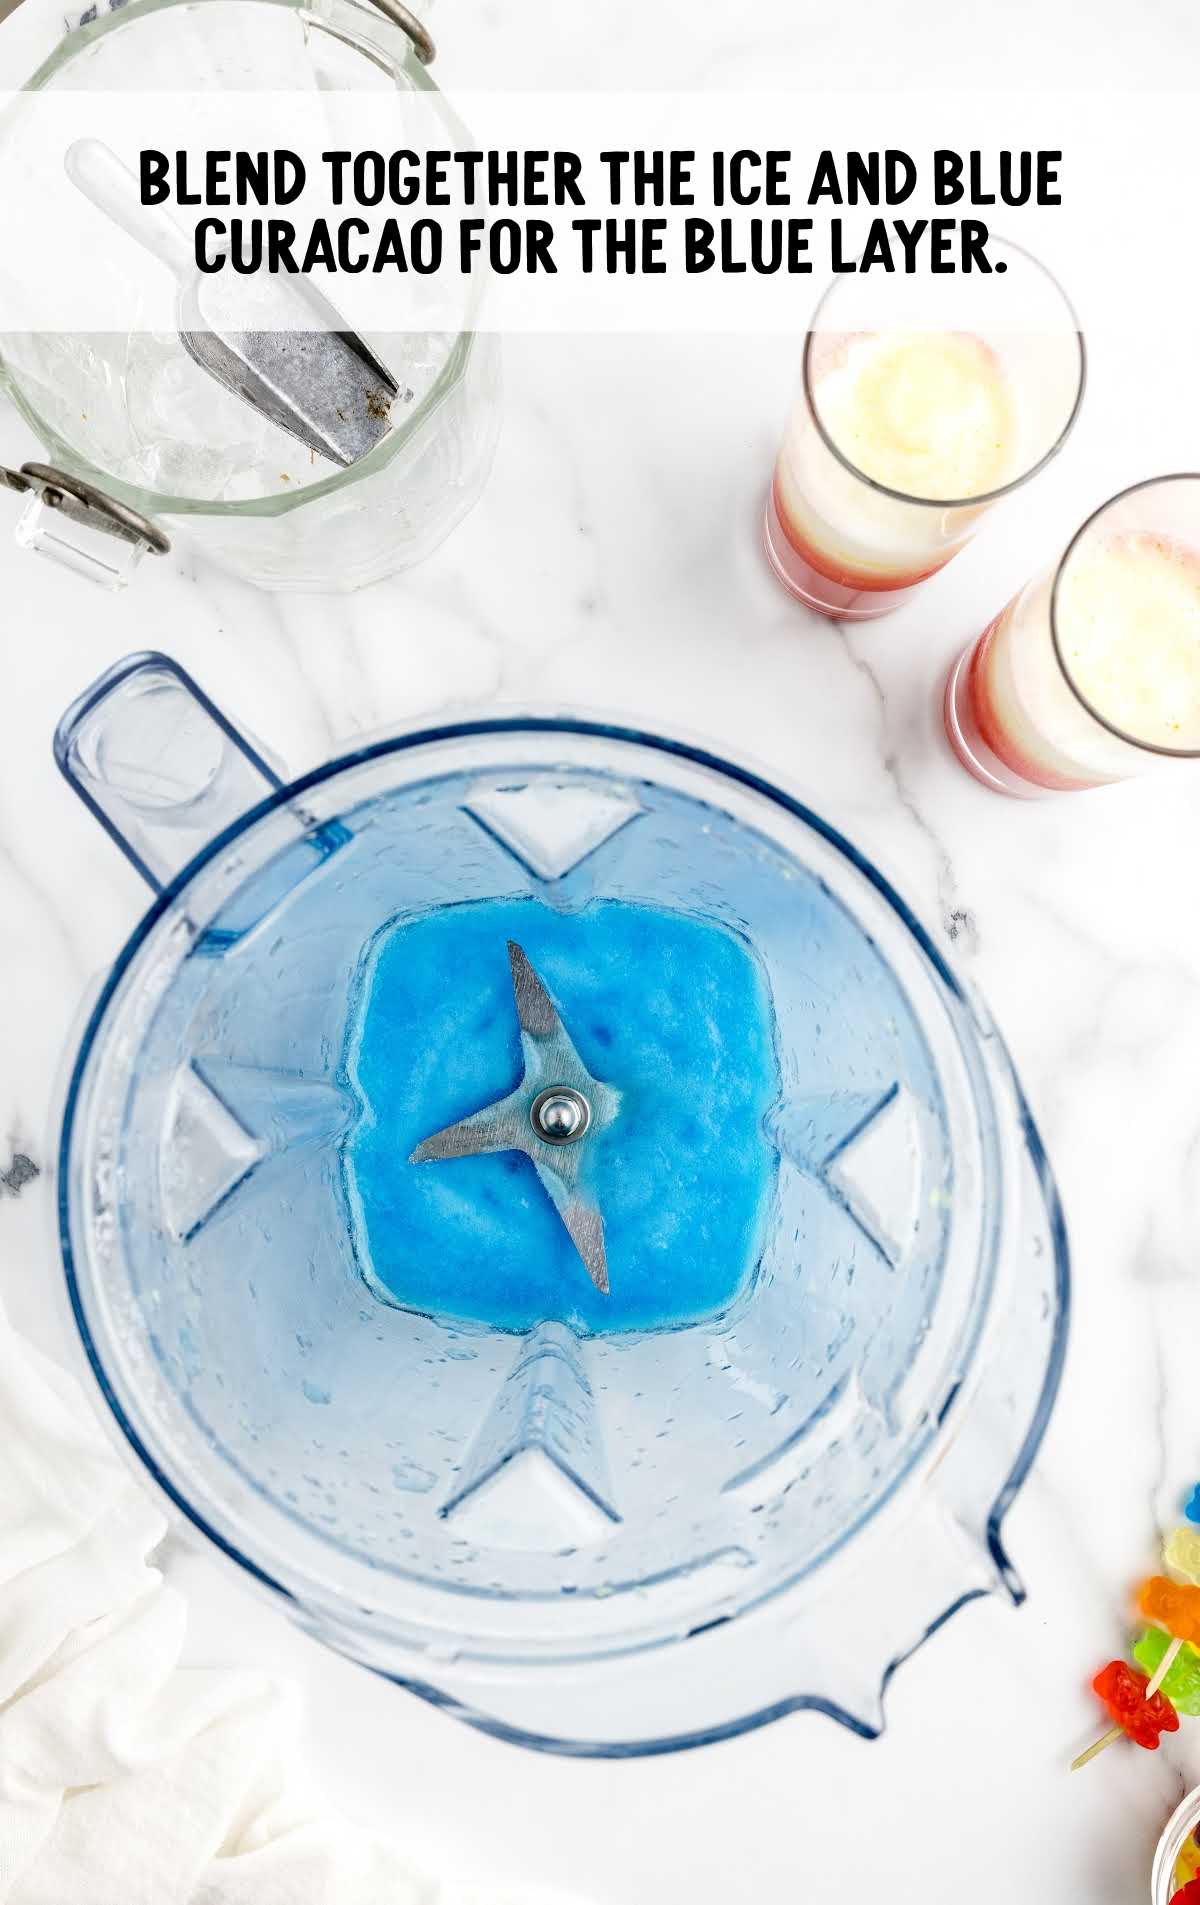 ice and blue curacao blended together in a blender